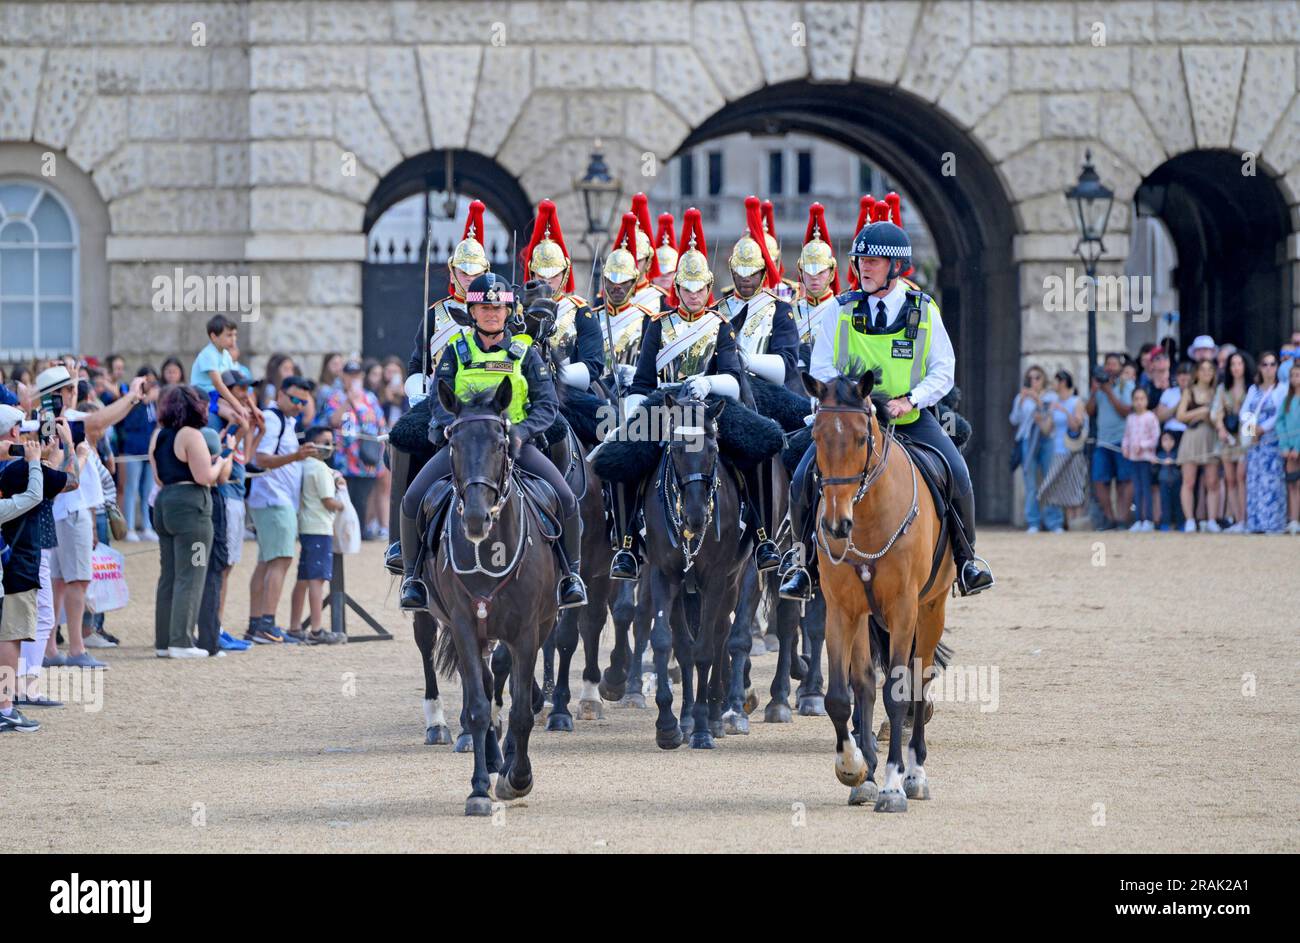 London, UK. Member of the Household Cavalry (Blues and Royals) escorted by mounted police from Horse Guards Parade after the daily Changing of the .. Stock Photo